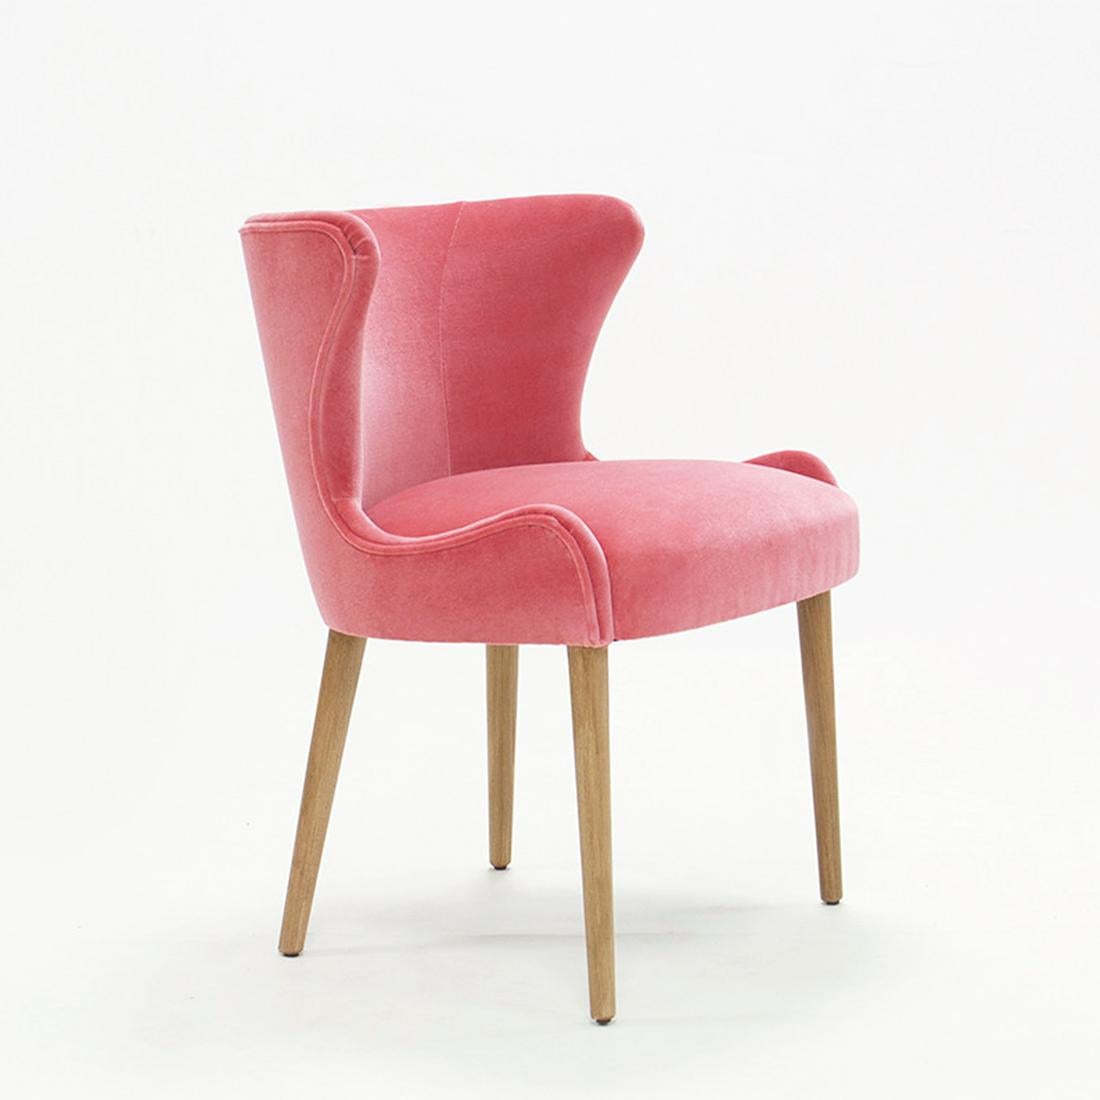 Chair Darling with structure in solid wood, upholstered
seat and back, covered with high quality ruby pink velvet 
fabric. Also available with other fabrics on request.
 